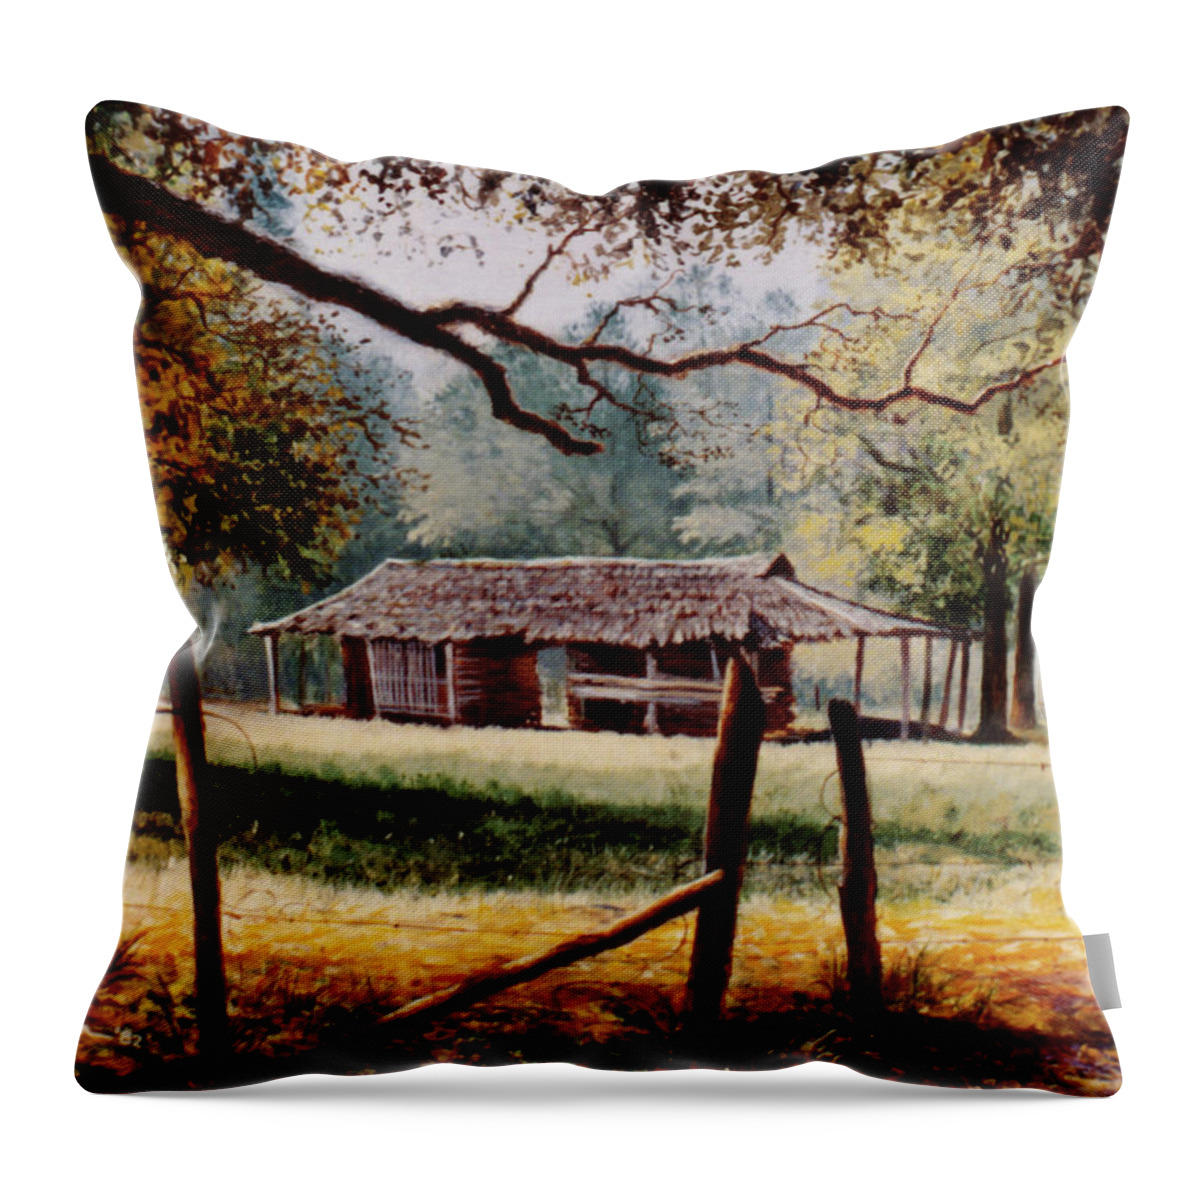 Corn Throw Pillow featuring the painting Corn Crib by Randy Welborn